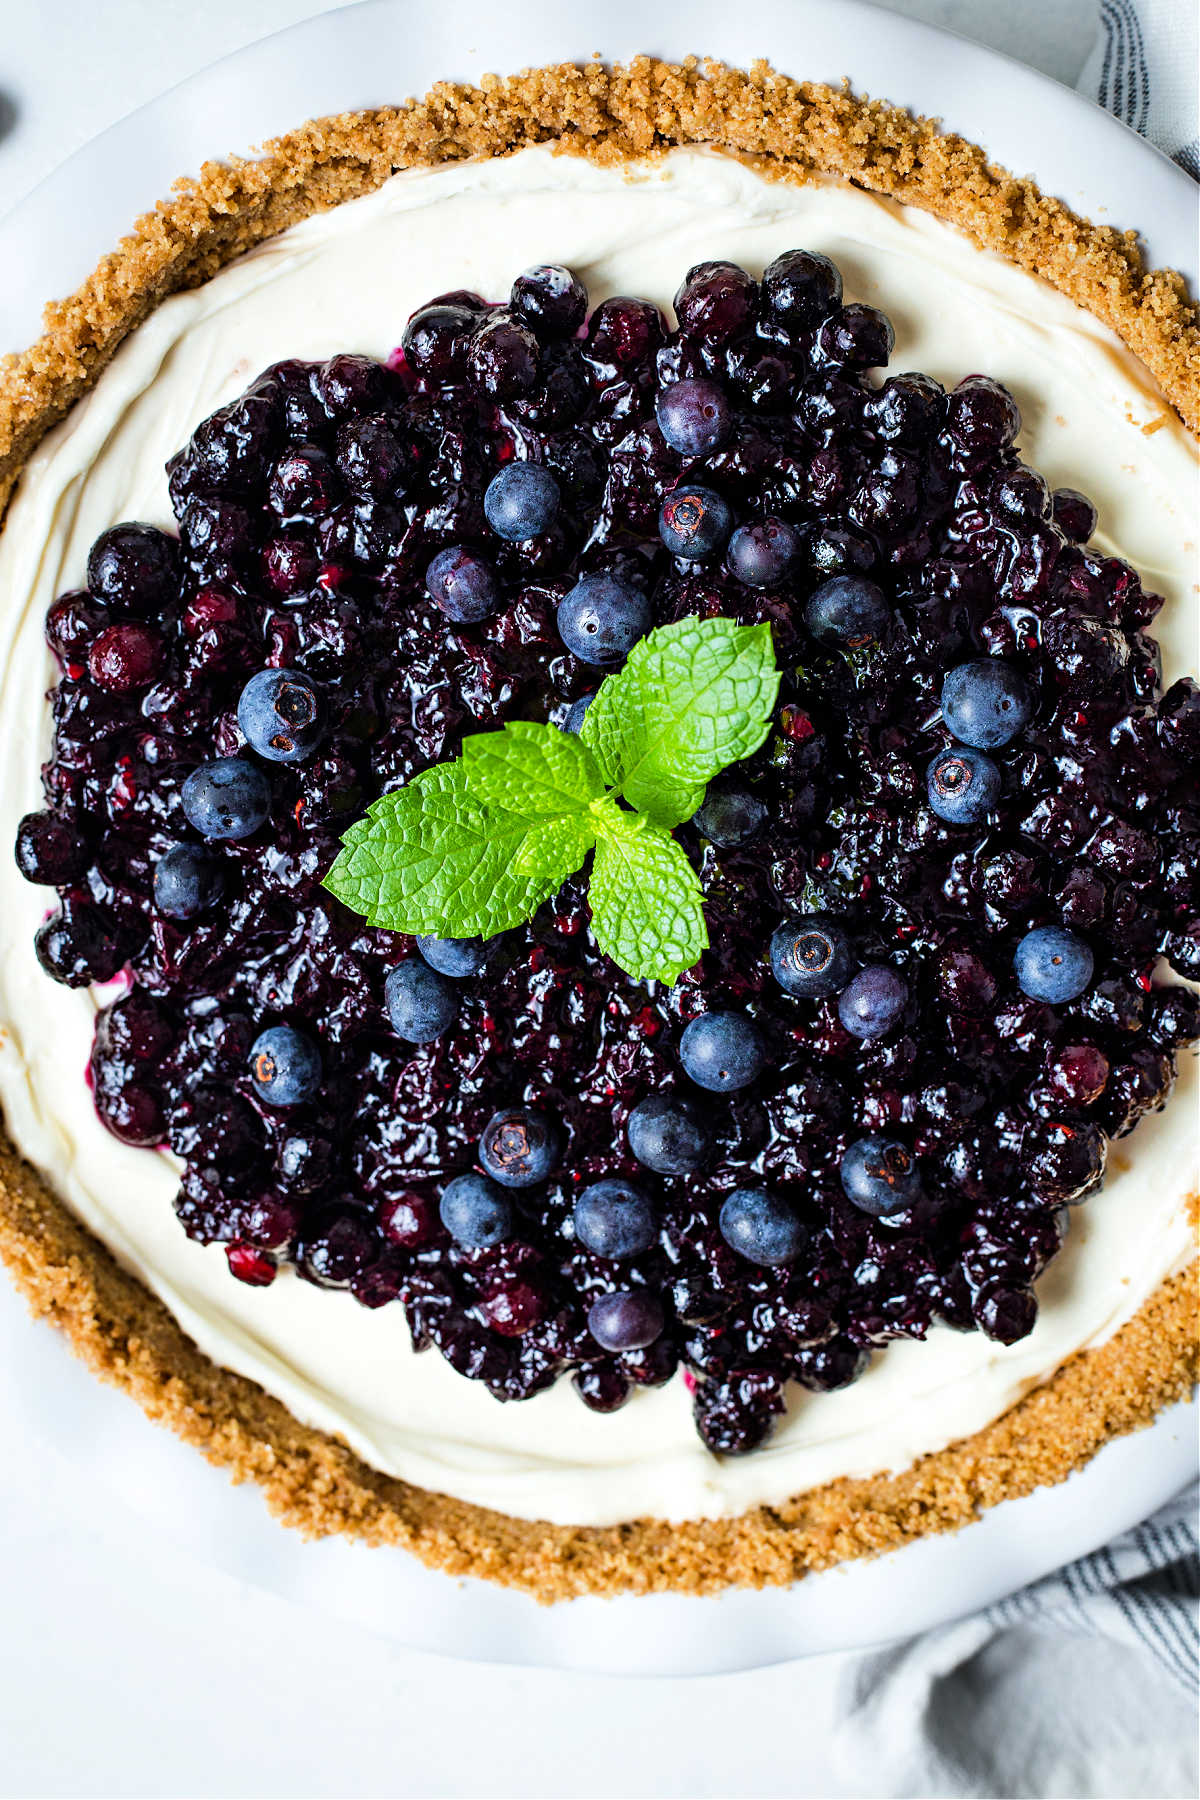 top down view of a no bake blueberry cheesecake in a white pie plate with a mint sprig garnish.